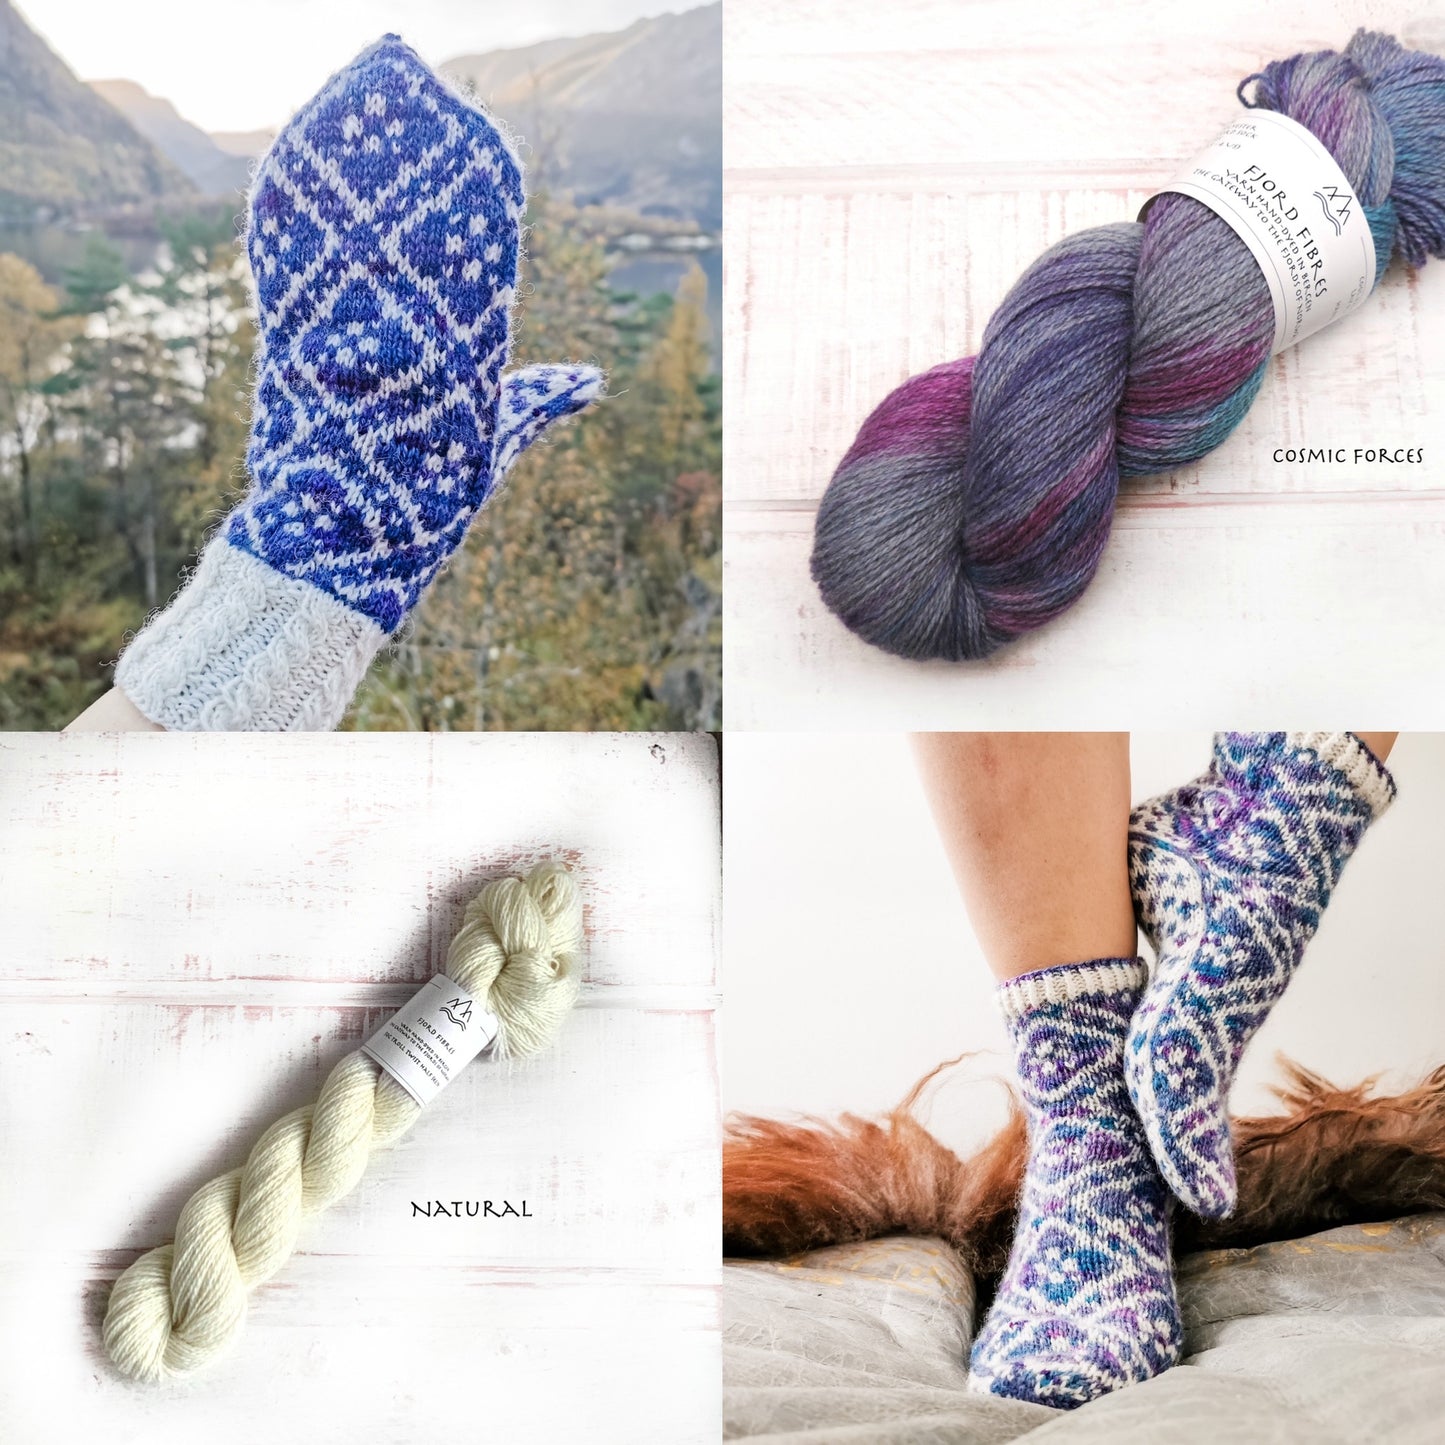 Fleur Élise Mittens and Sock Kit  Bundle - Cosmic Forces/Natural - Yarn and Printed Pattern in English/Norwegian